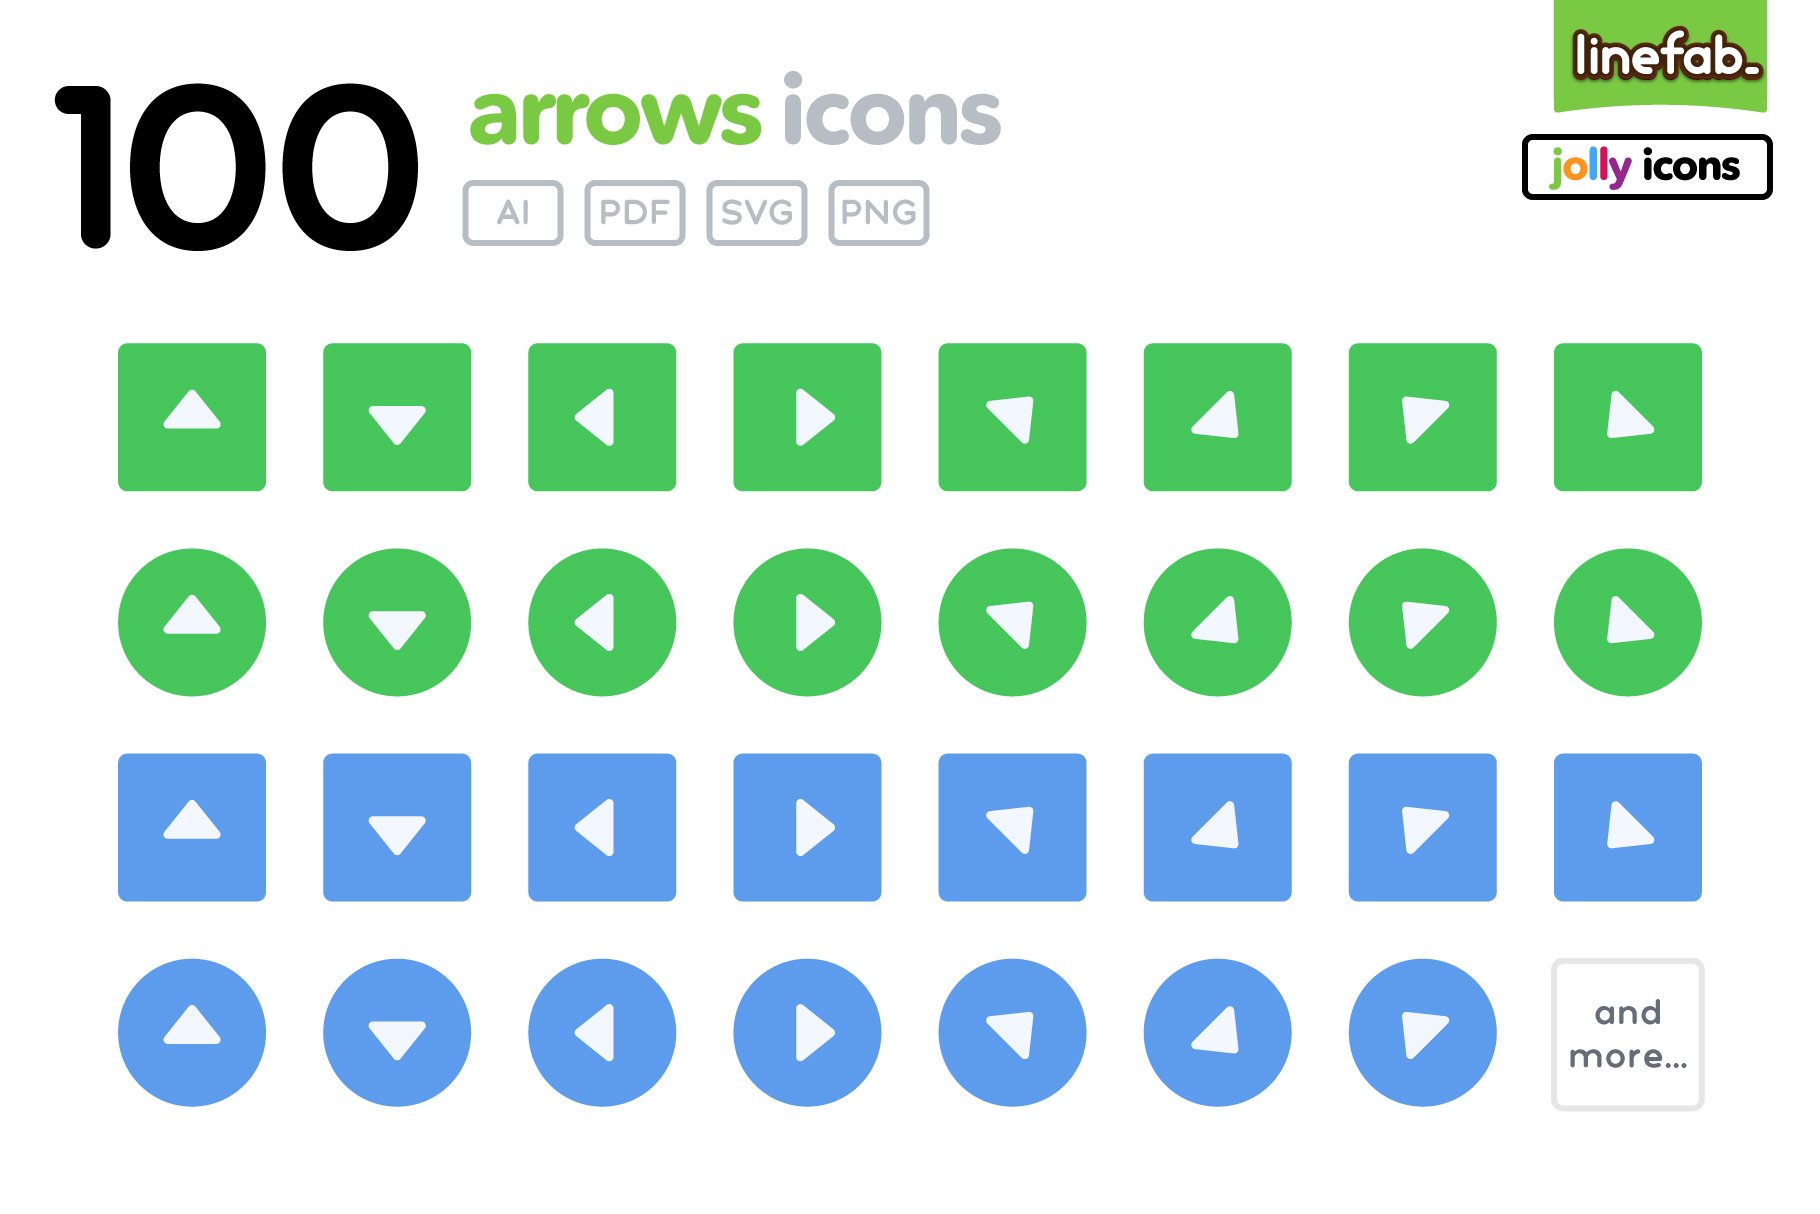 100 Arrows Icons - 3 - Jolly cover image.